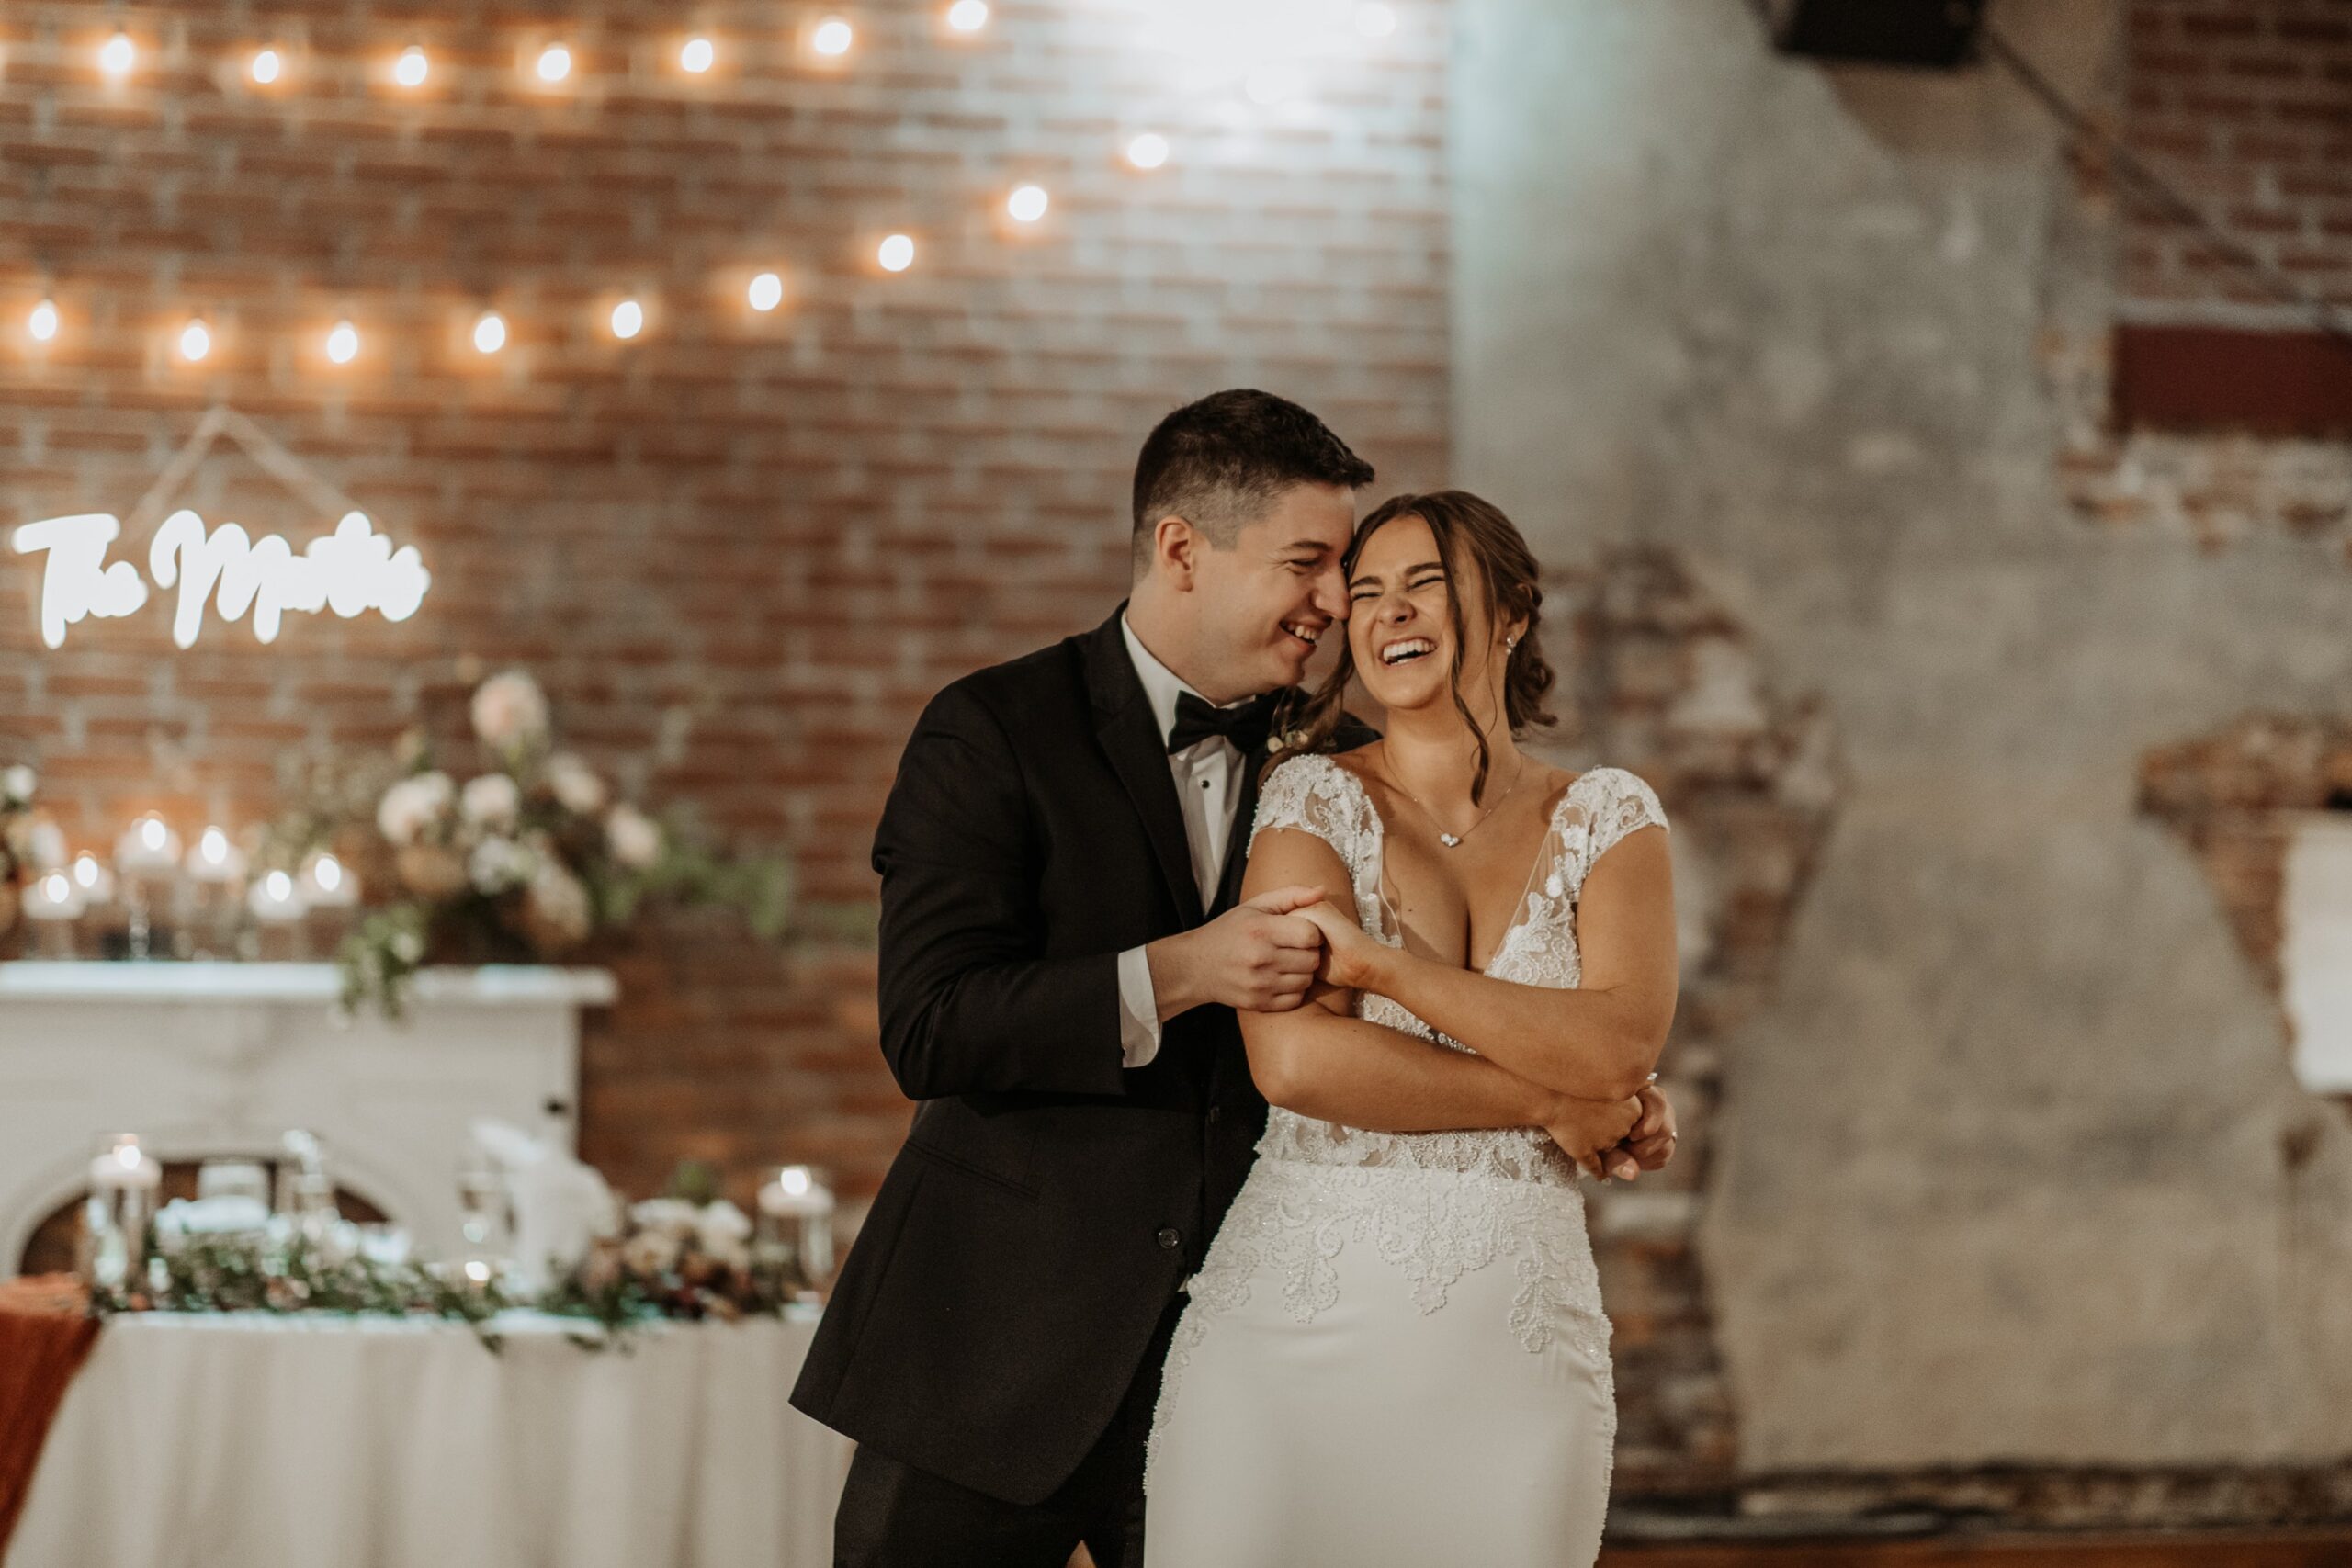 Husband and wife embrace as they have their first dance